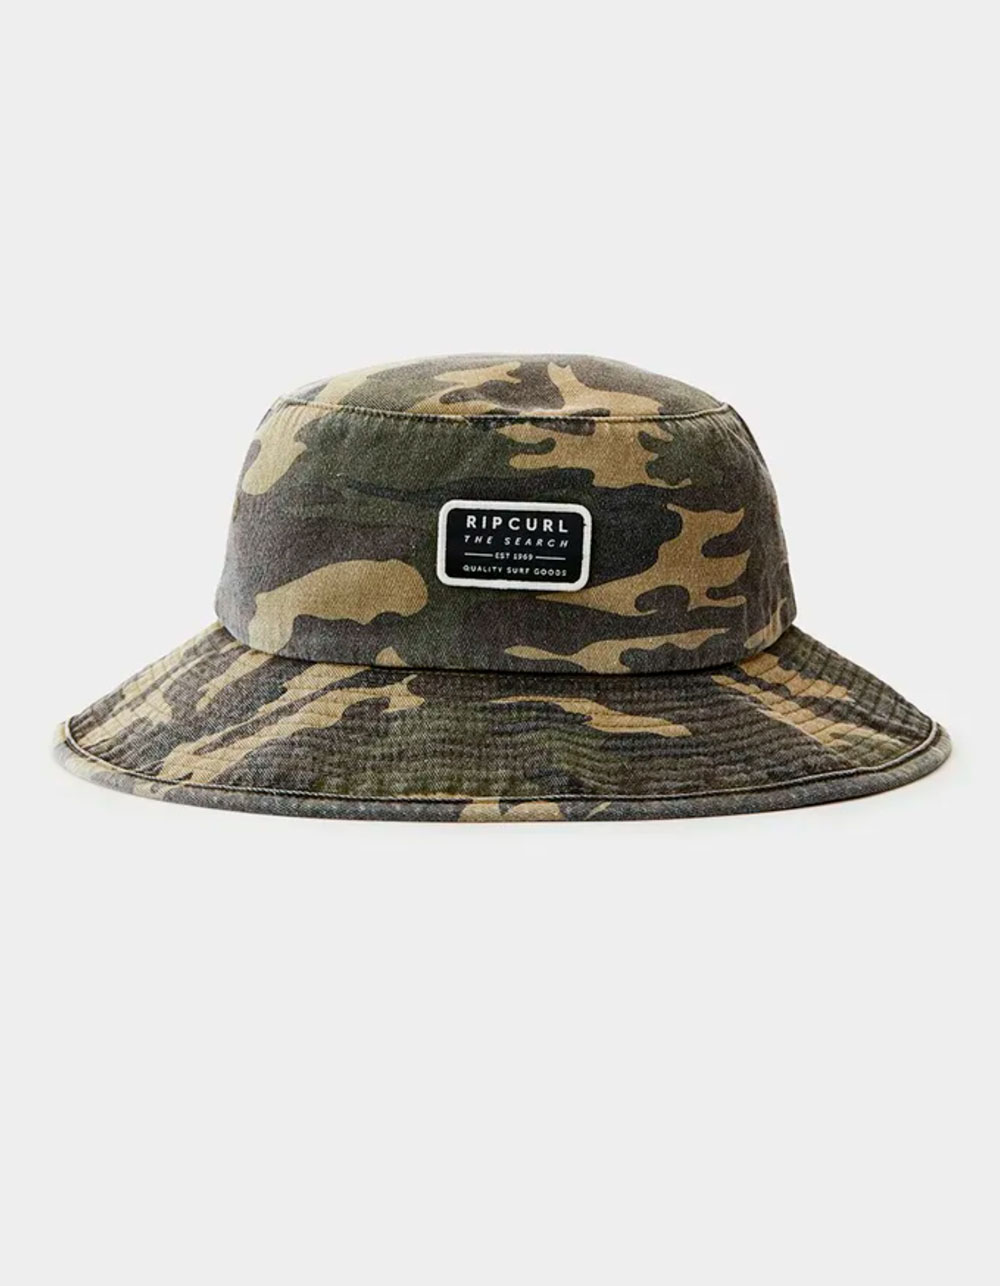 Camo/Charcoal Caps - Will Banister